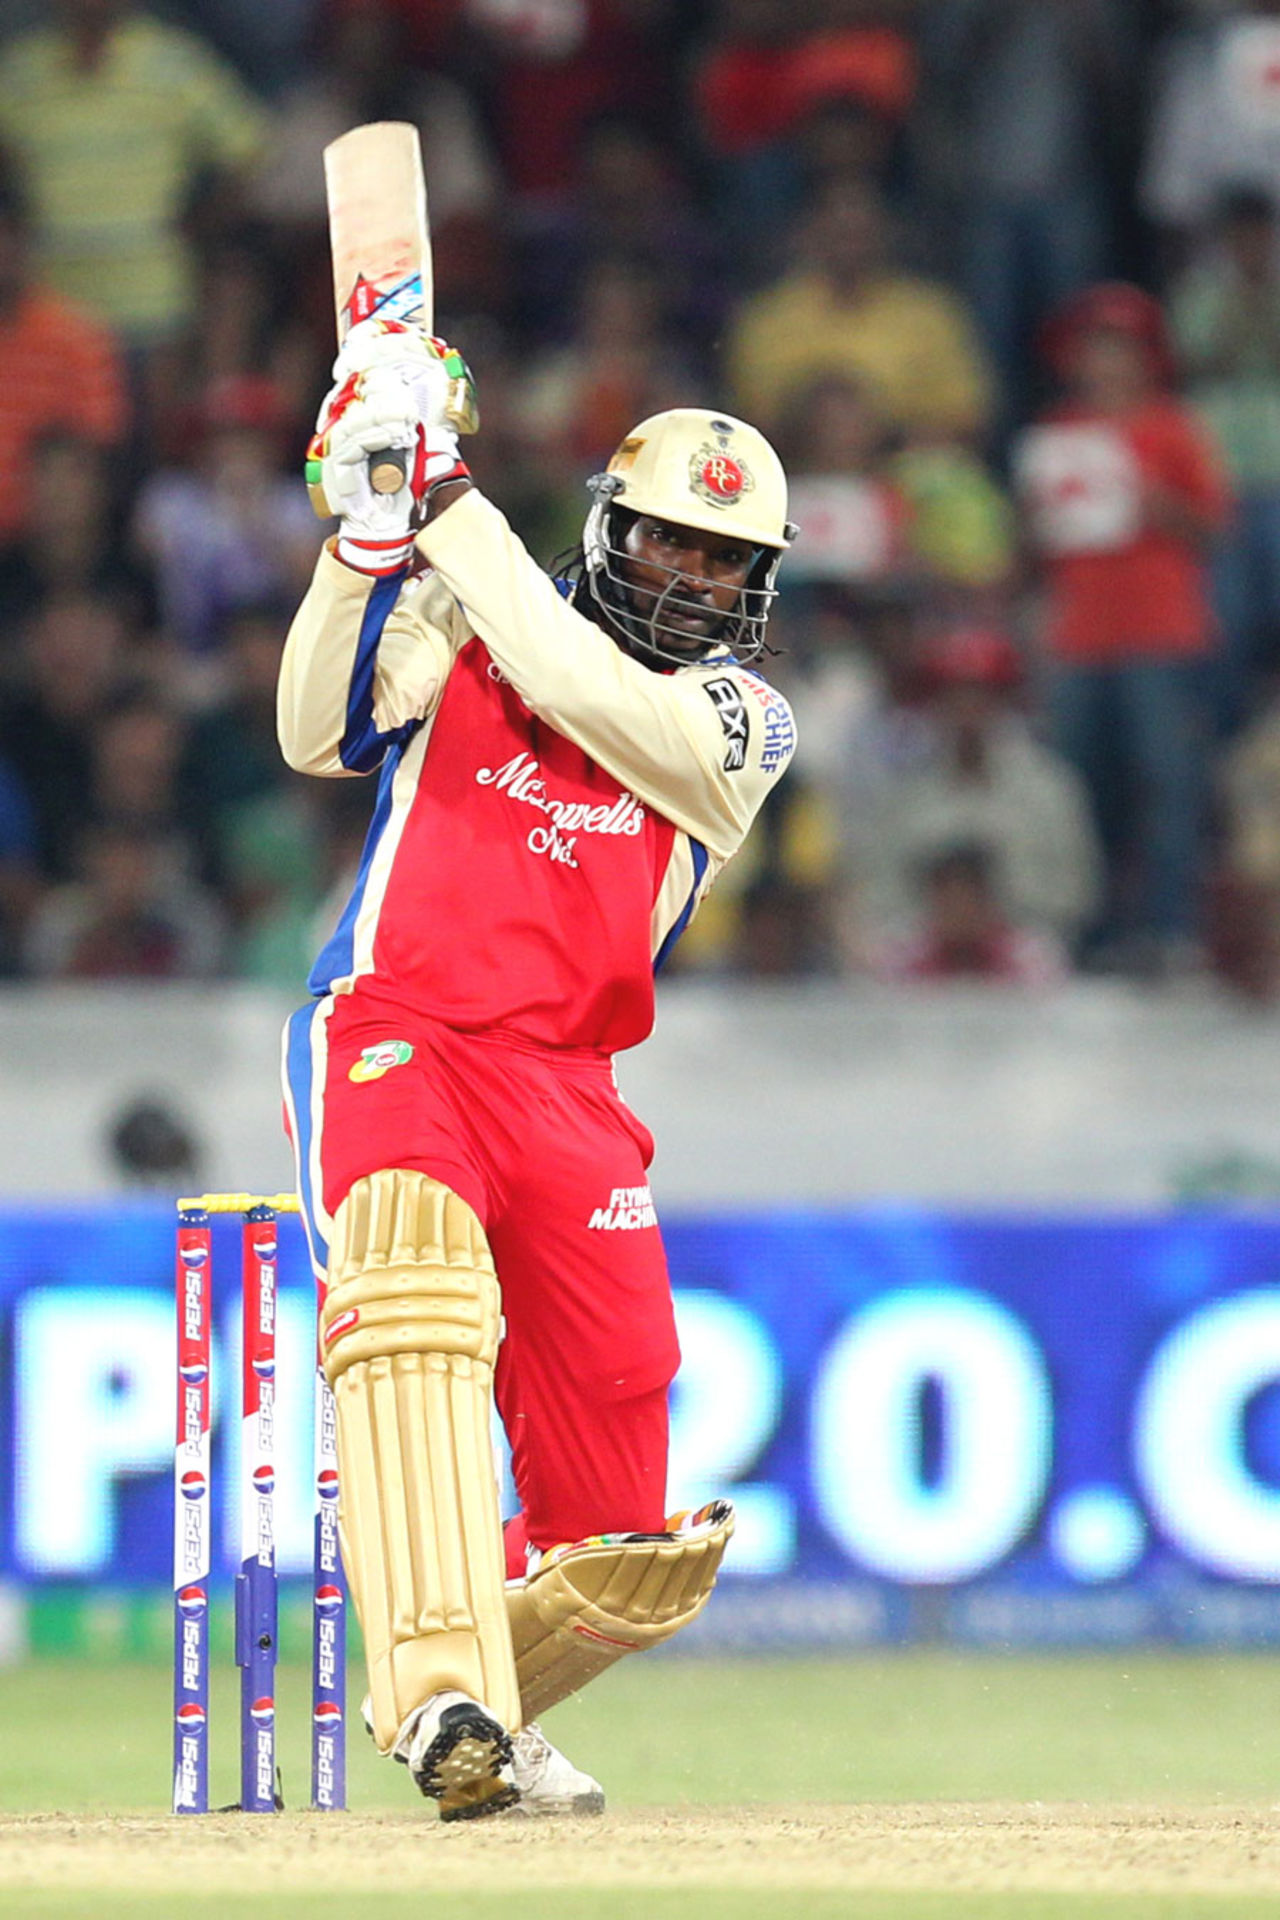 Chris Gayle smashes one down the ground, Sunrisers Hyderabad v Royal Challengers Bangalore, IPL, Hyderabad, April 7, 2013